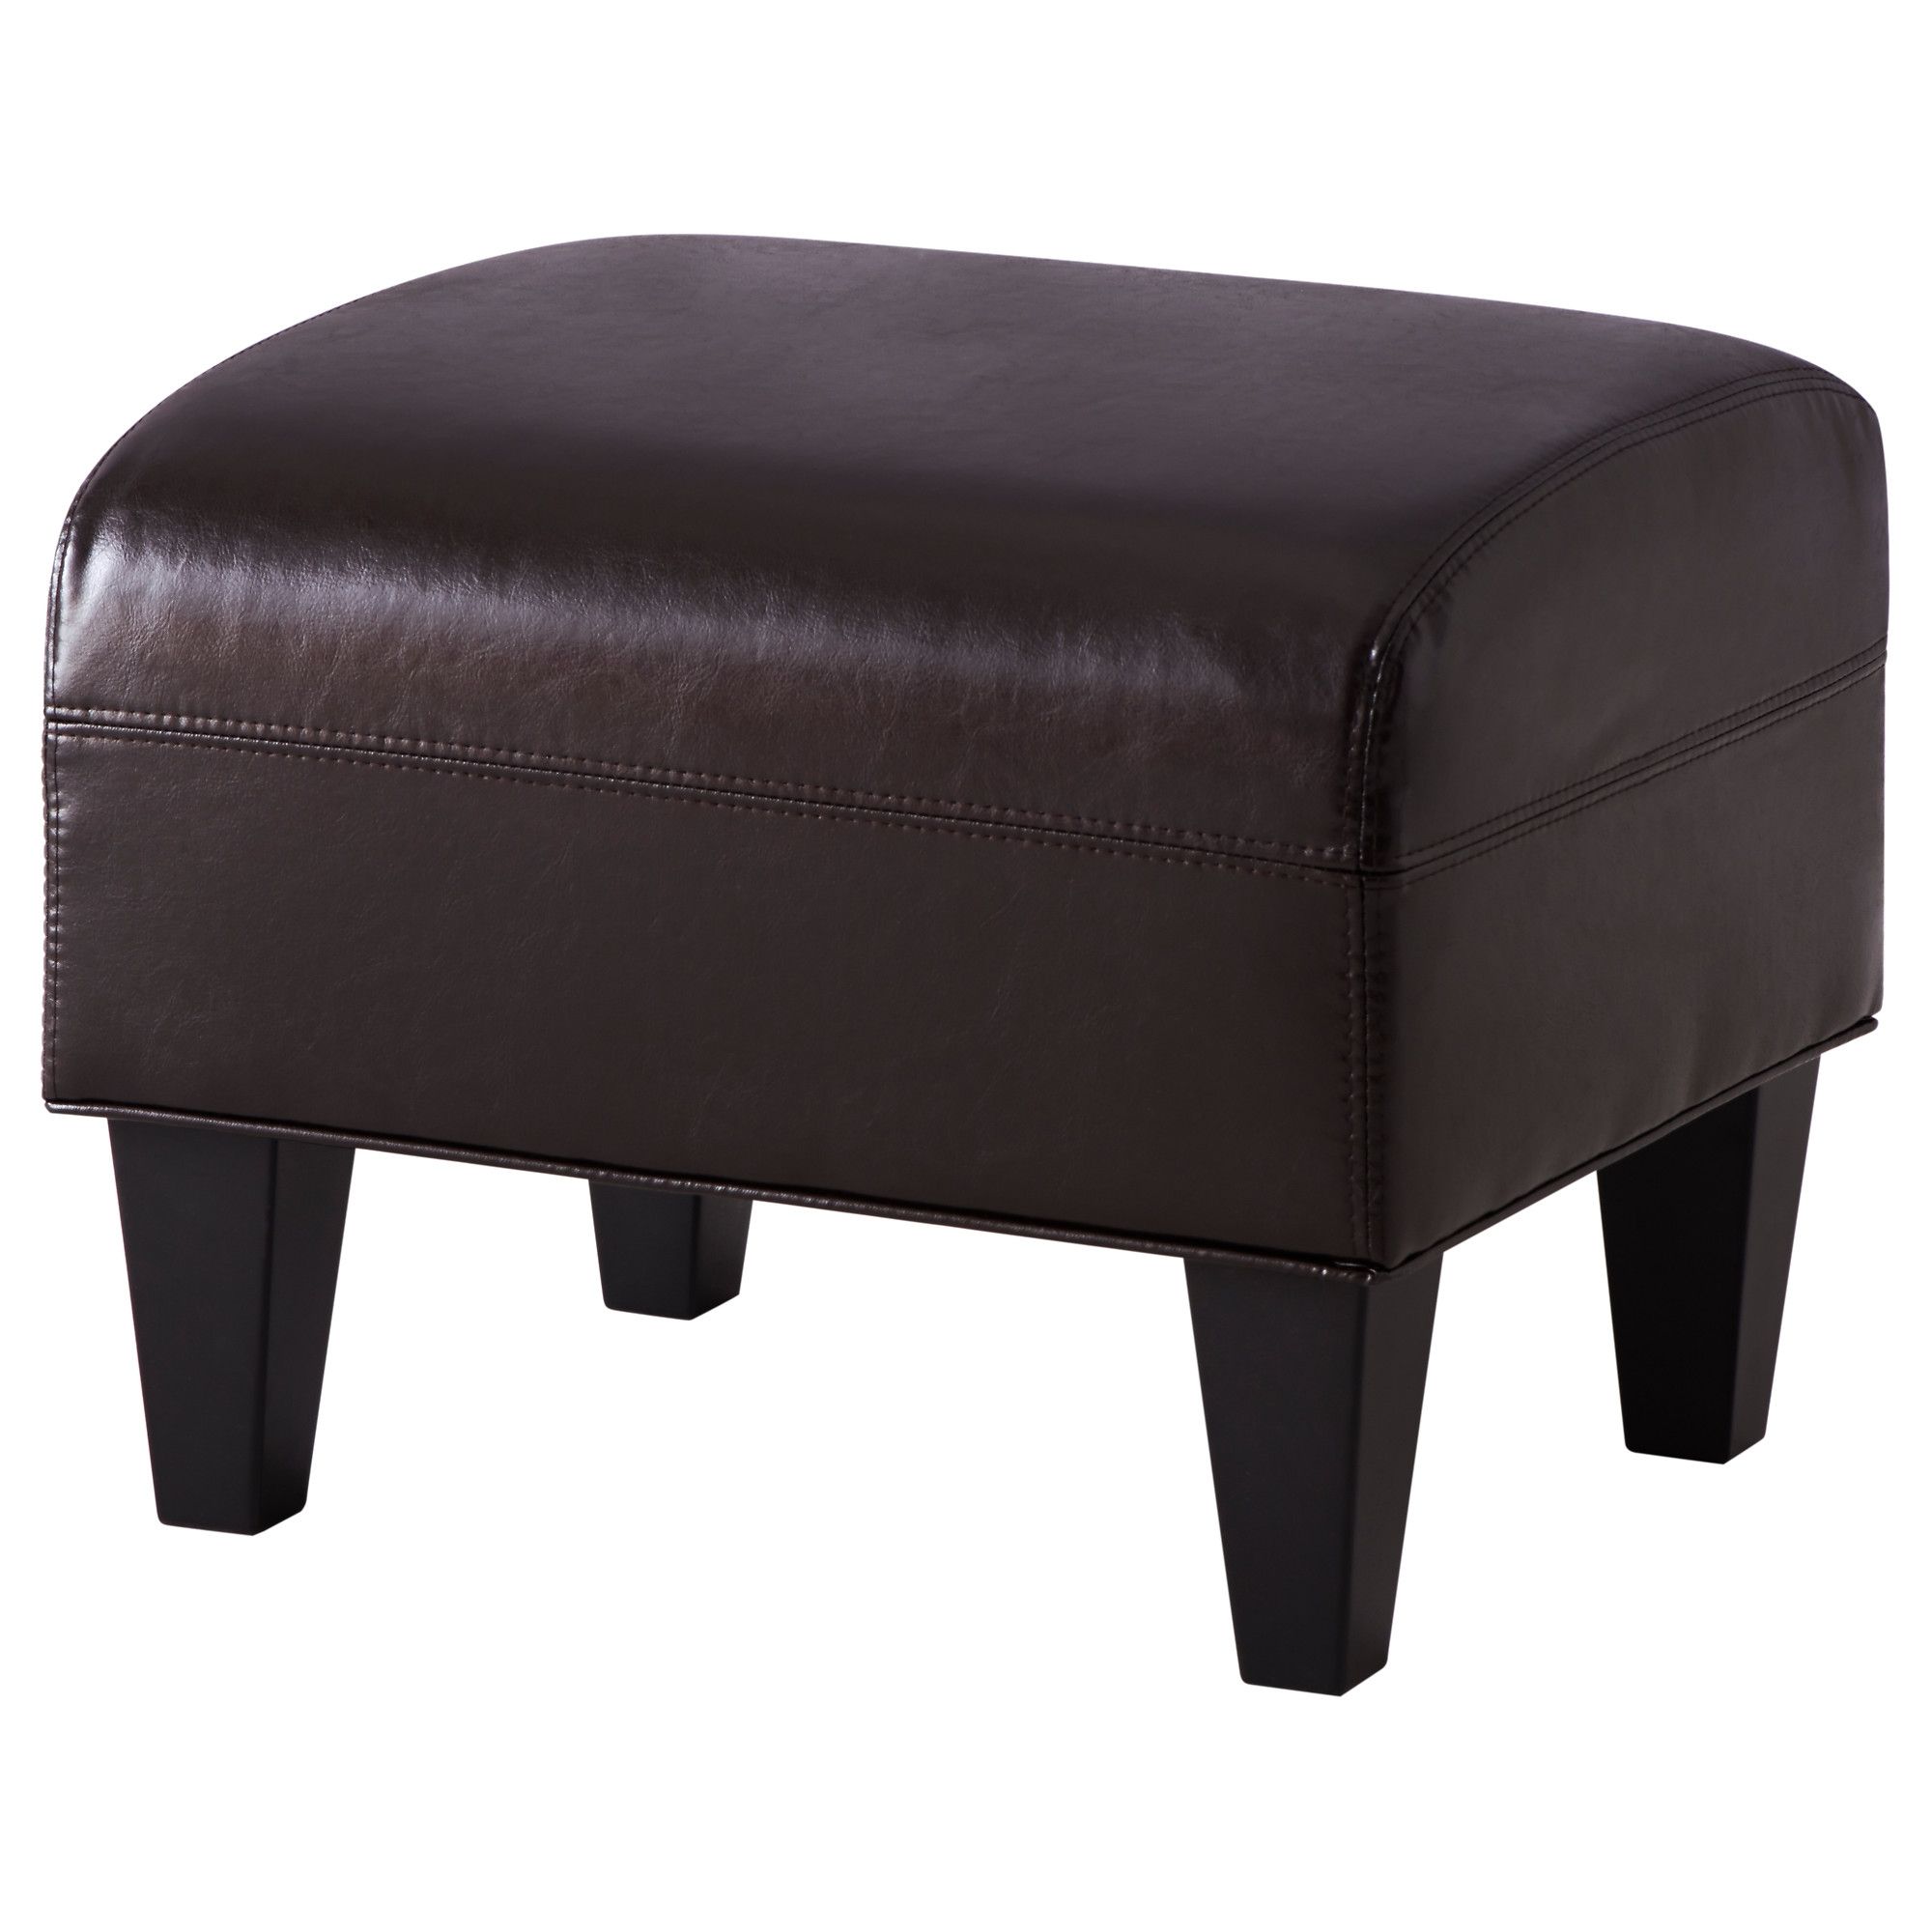 Ideas Leather Pouffe Footstool In Leather Footstools And Pouffes (View 10 of 15)